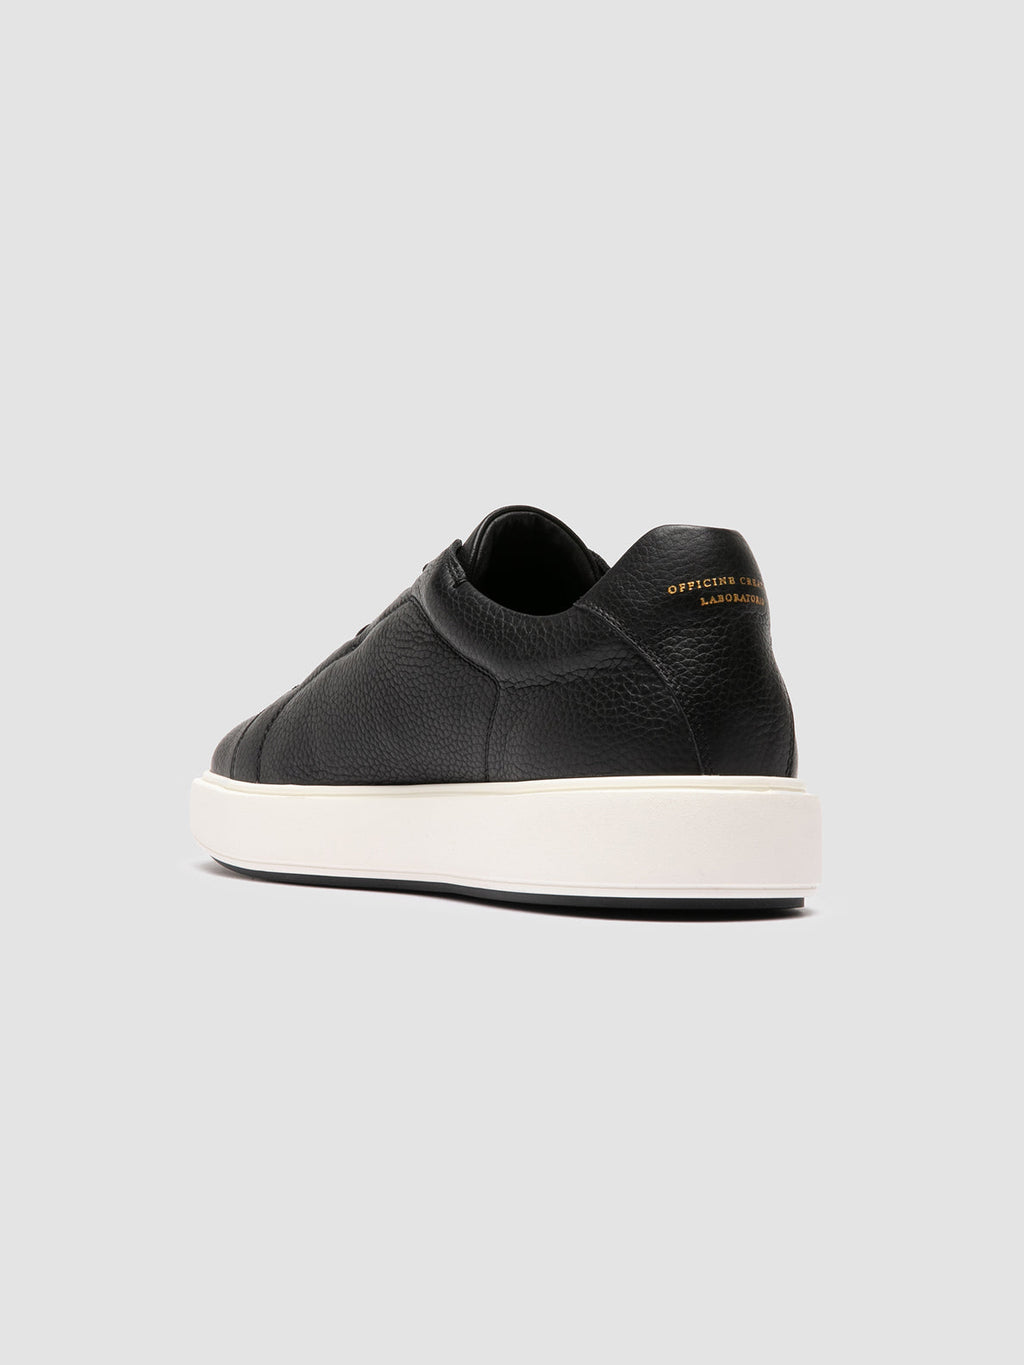 SLOUCH 001 - Black Leather Low Top Sneakers